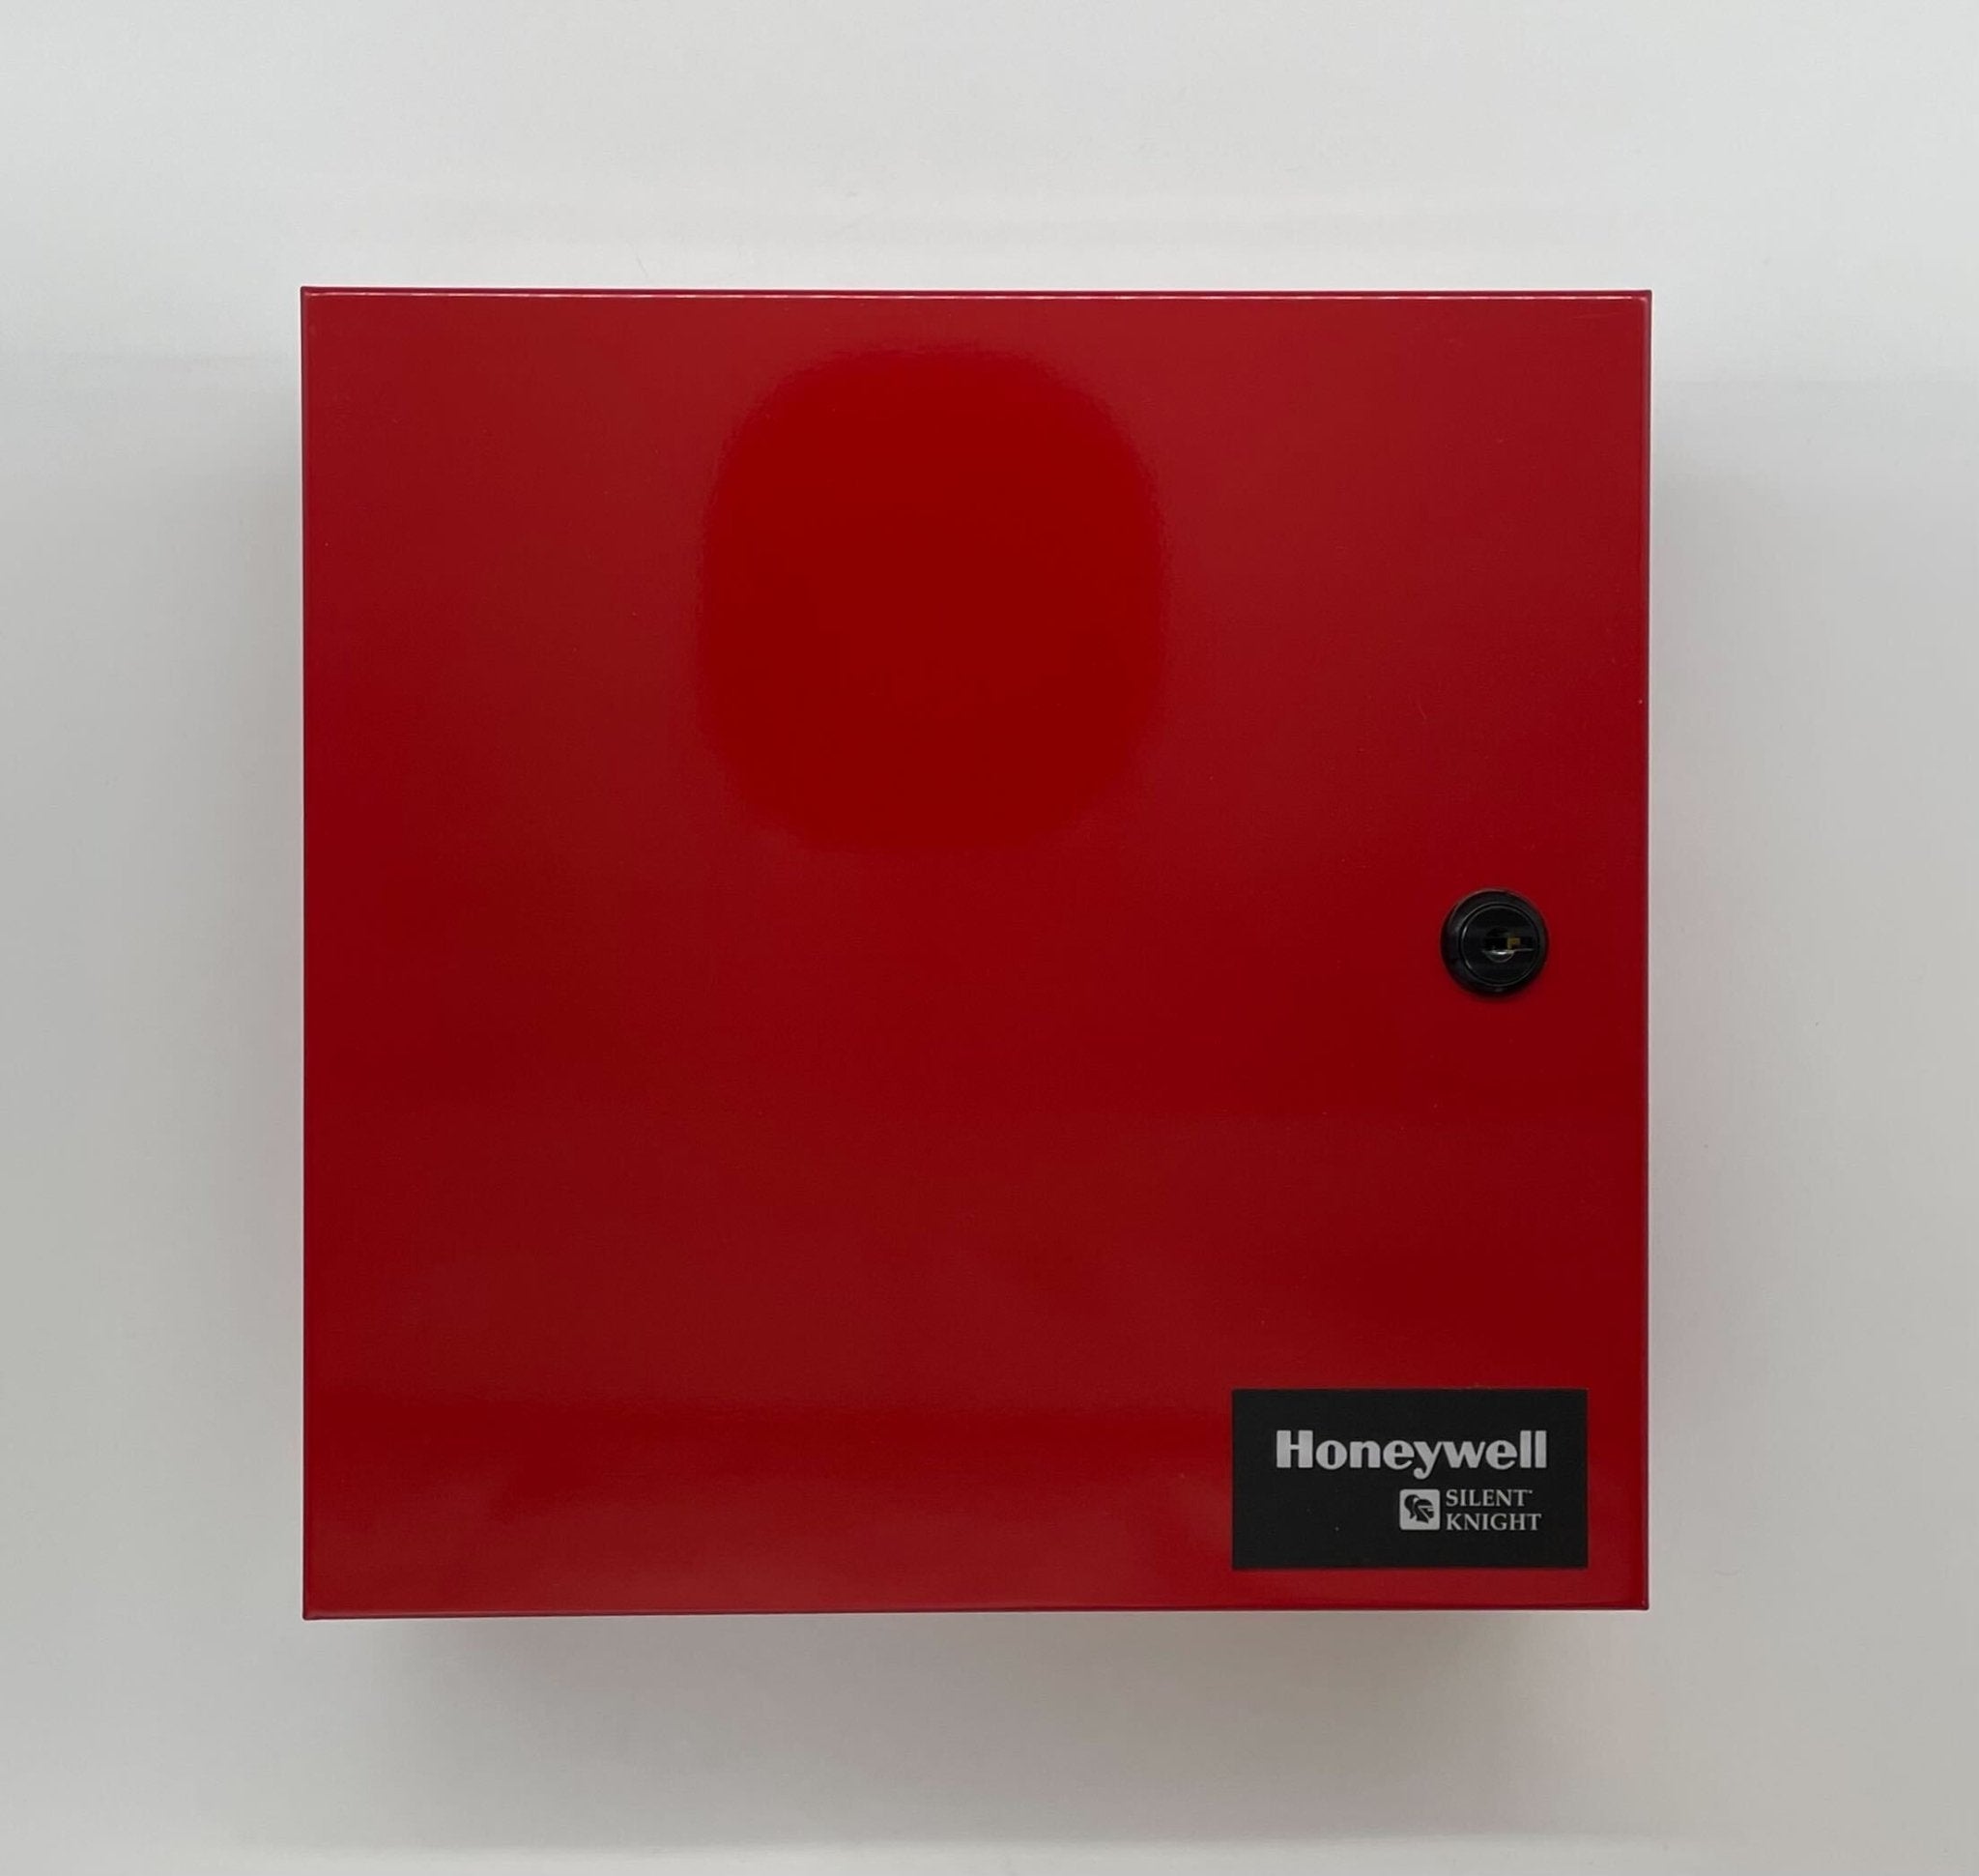 Silent Knight 5883 - The Fire Alarm Supplier